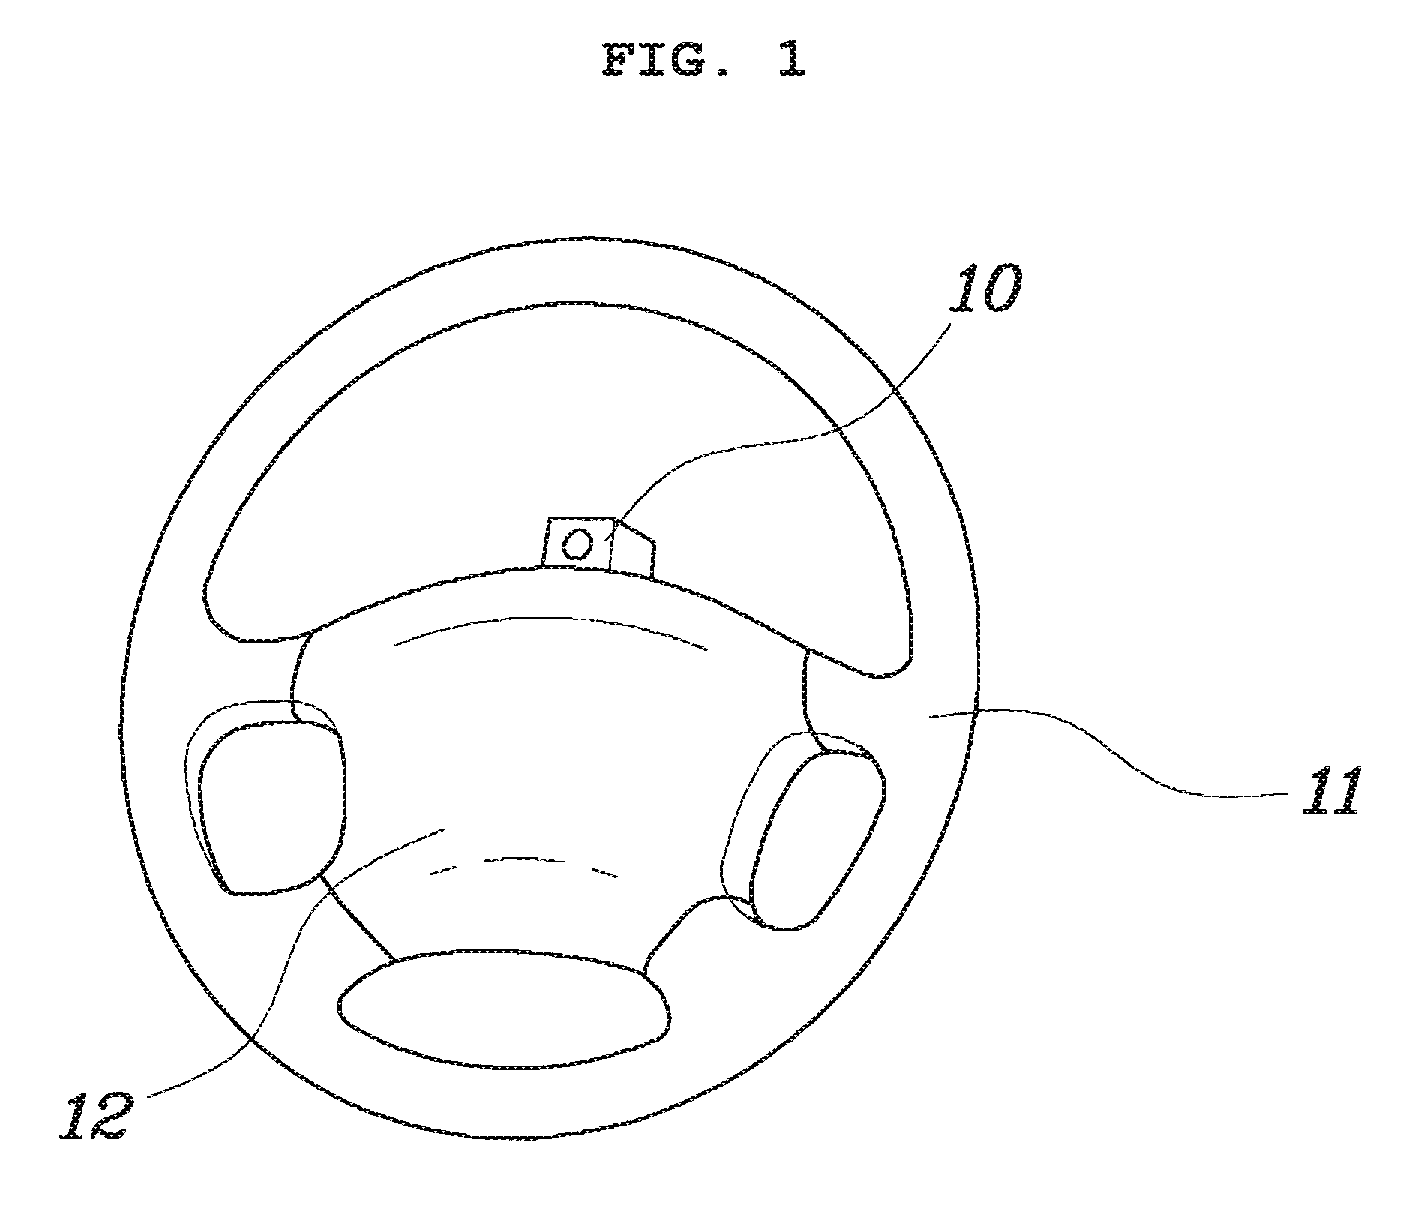 Driver's state monitoring system using a camera mounted on steering wheel